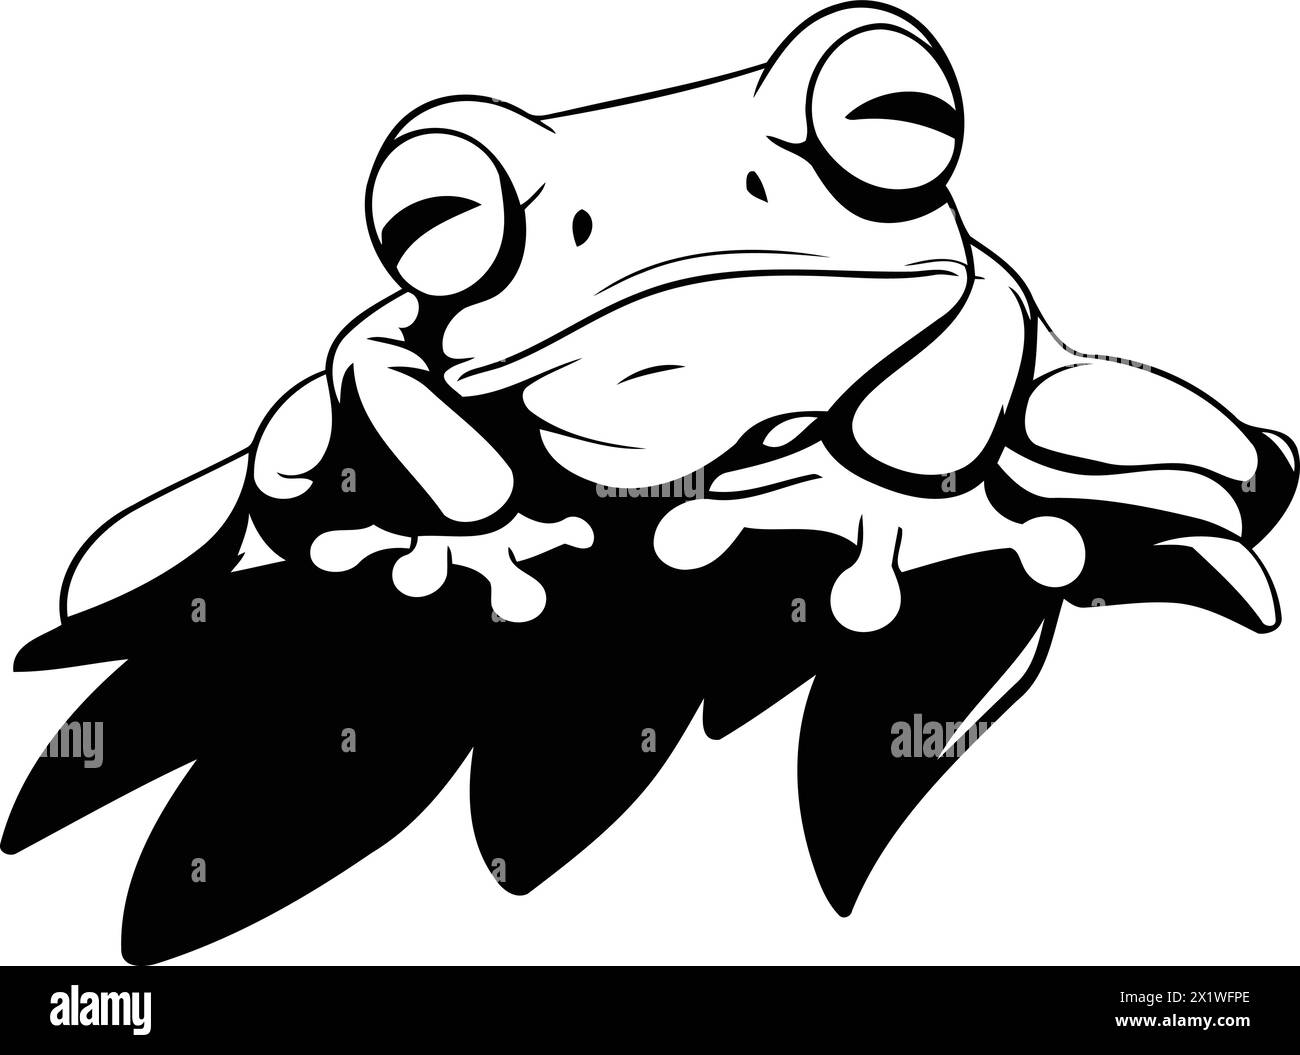 Cartoon green frog on a branch. Vector illustration isolated on white background. Stock Vector